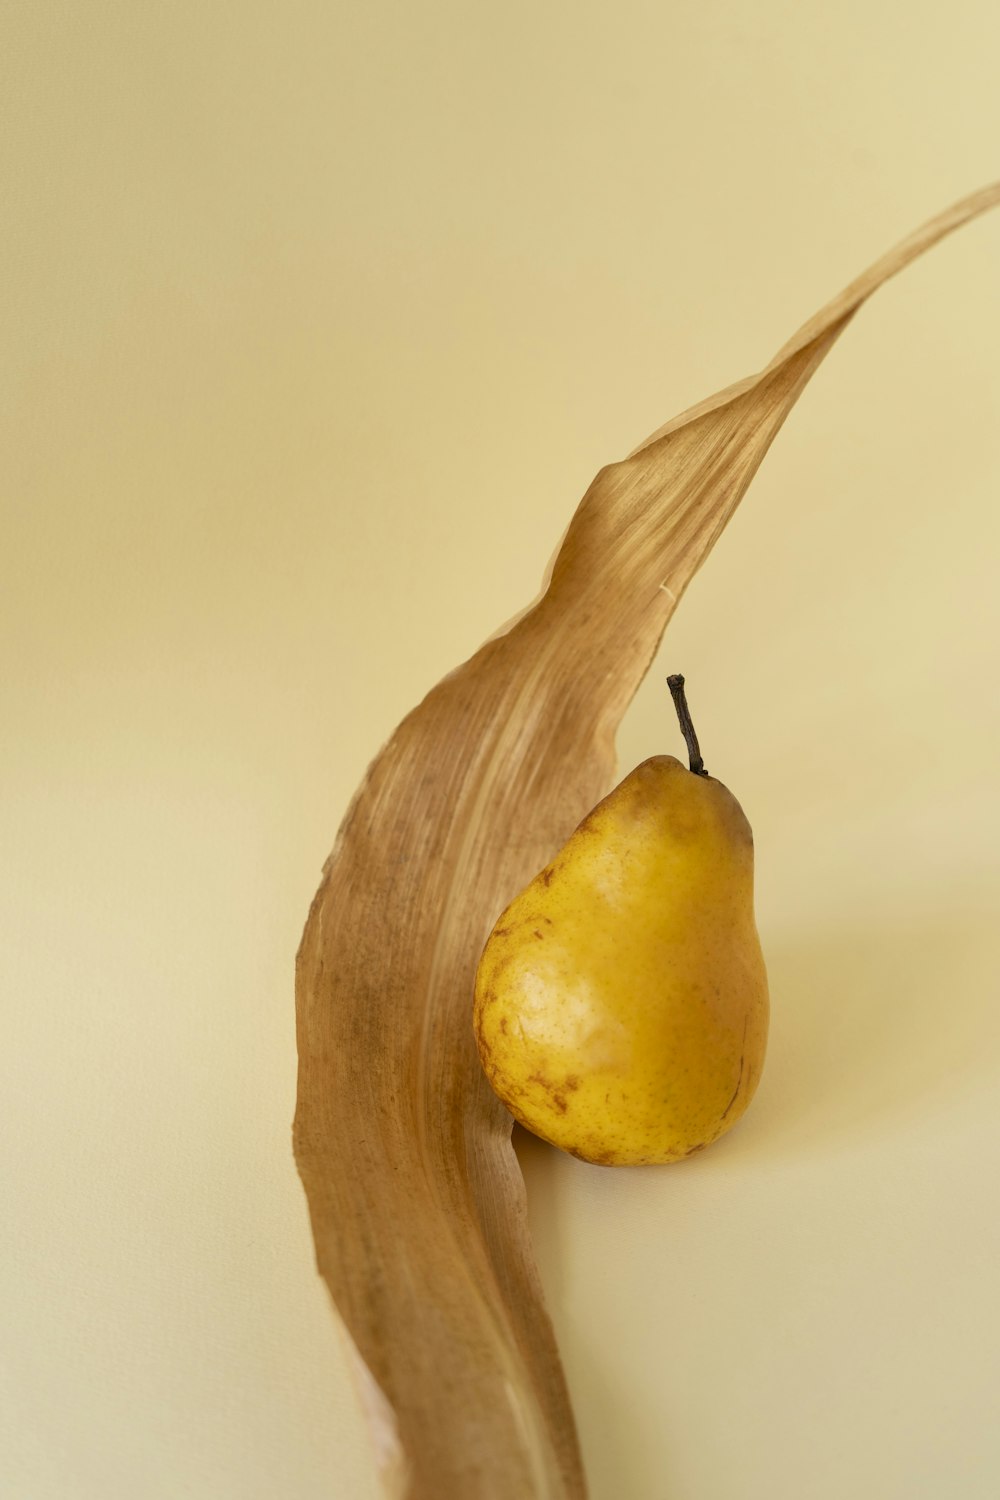 a piece of wood with a pear on it